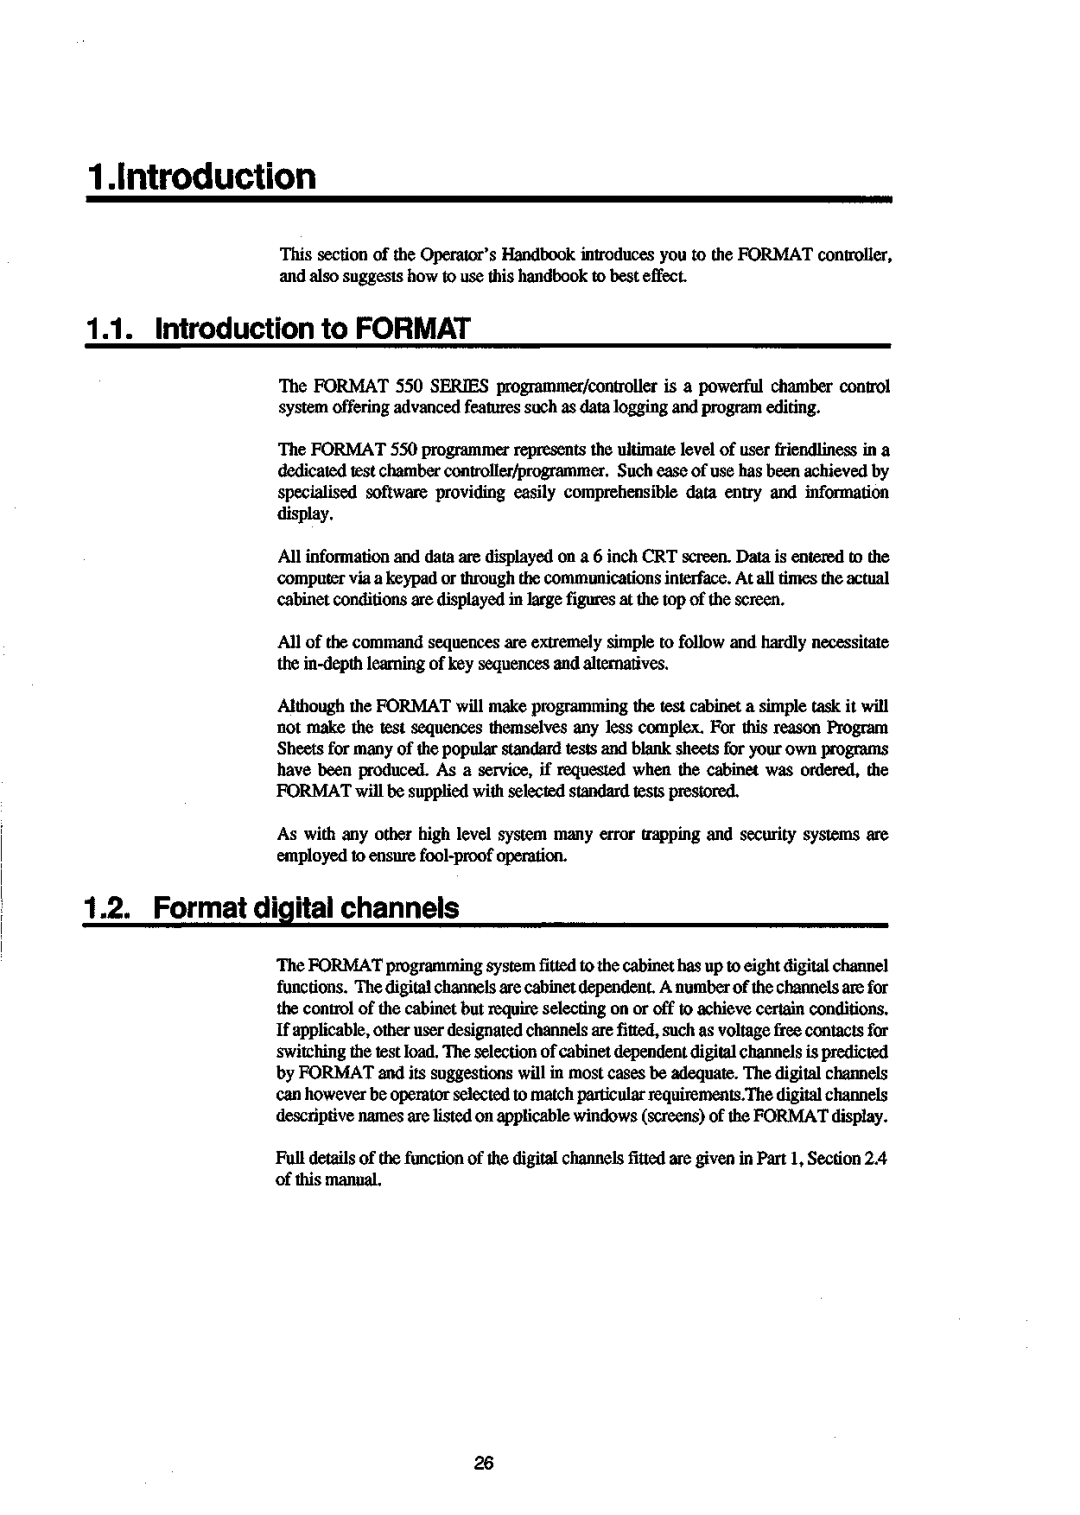 Sanyo 550 instruction manual Introduction to Format, Format digital channels 